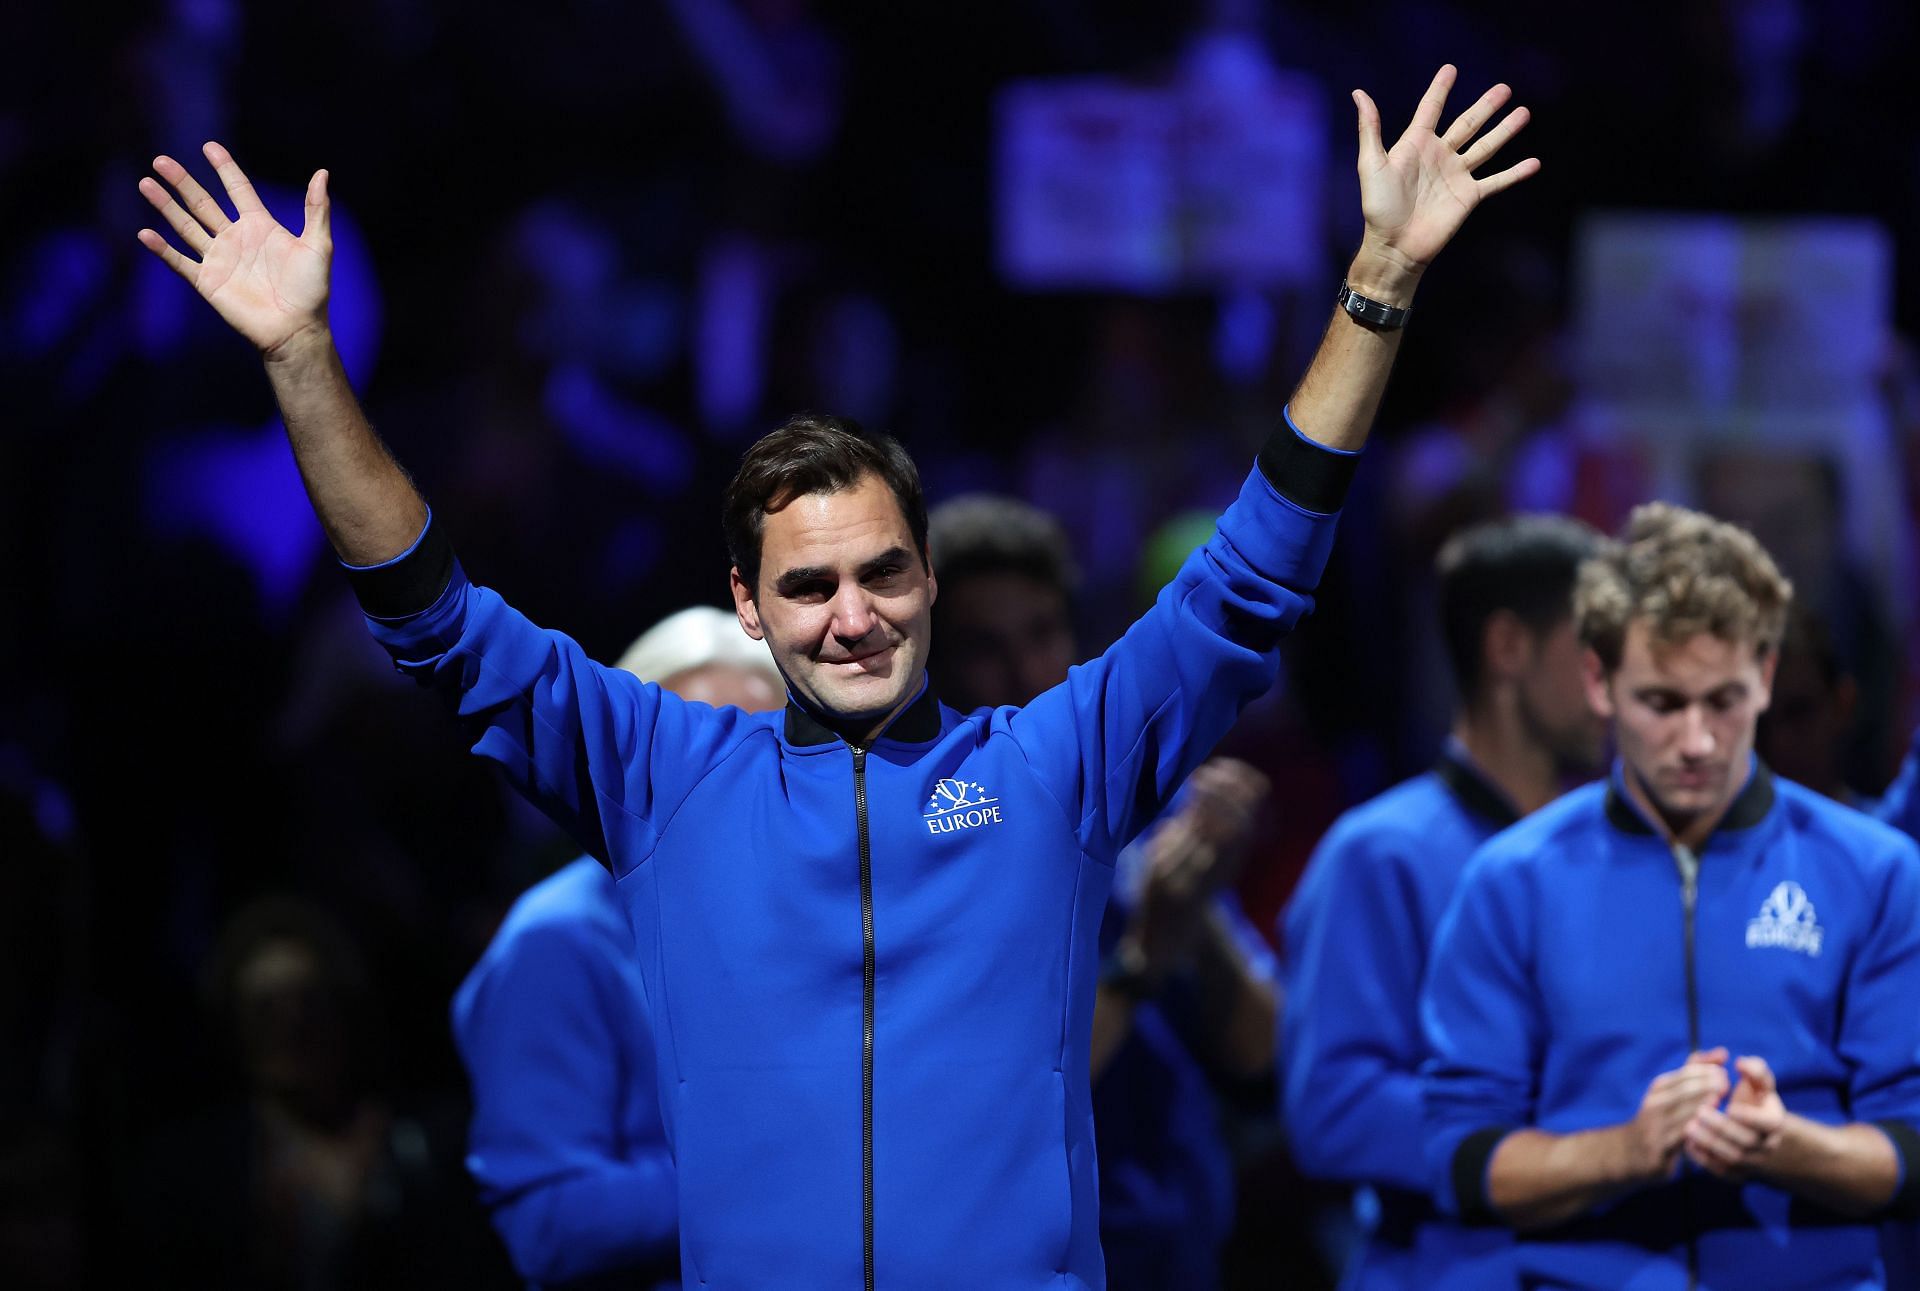 Roger Federer during his farewell at the Laver Cup